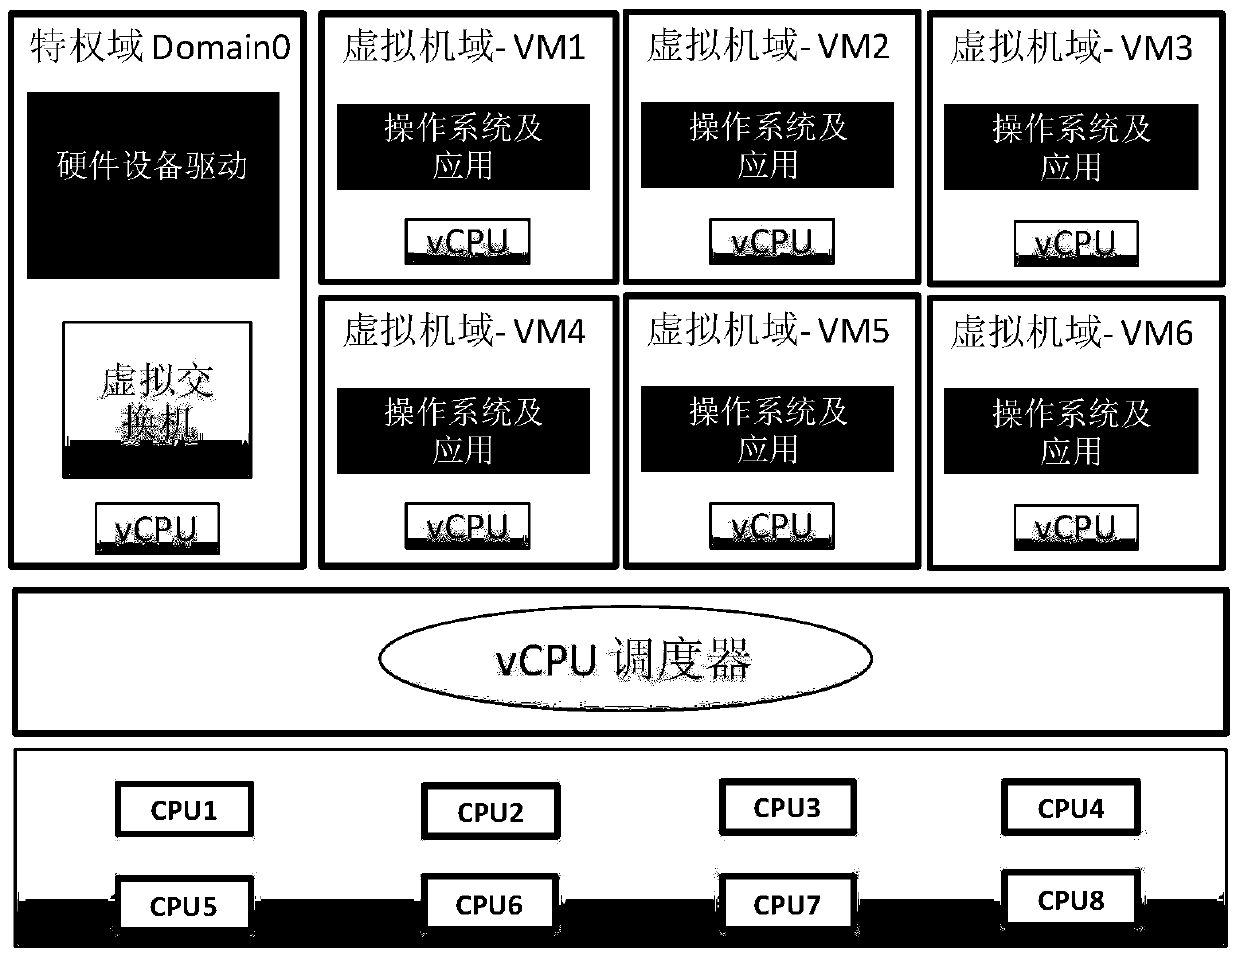 A resource pool management method for virtual machine vcpu scheduling